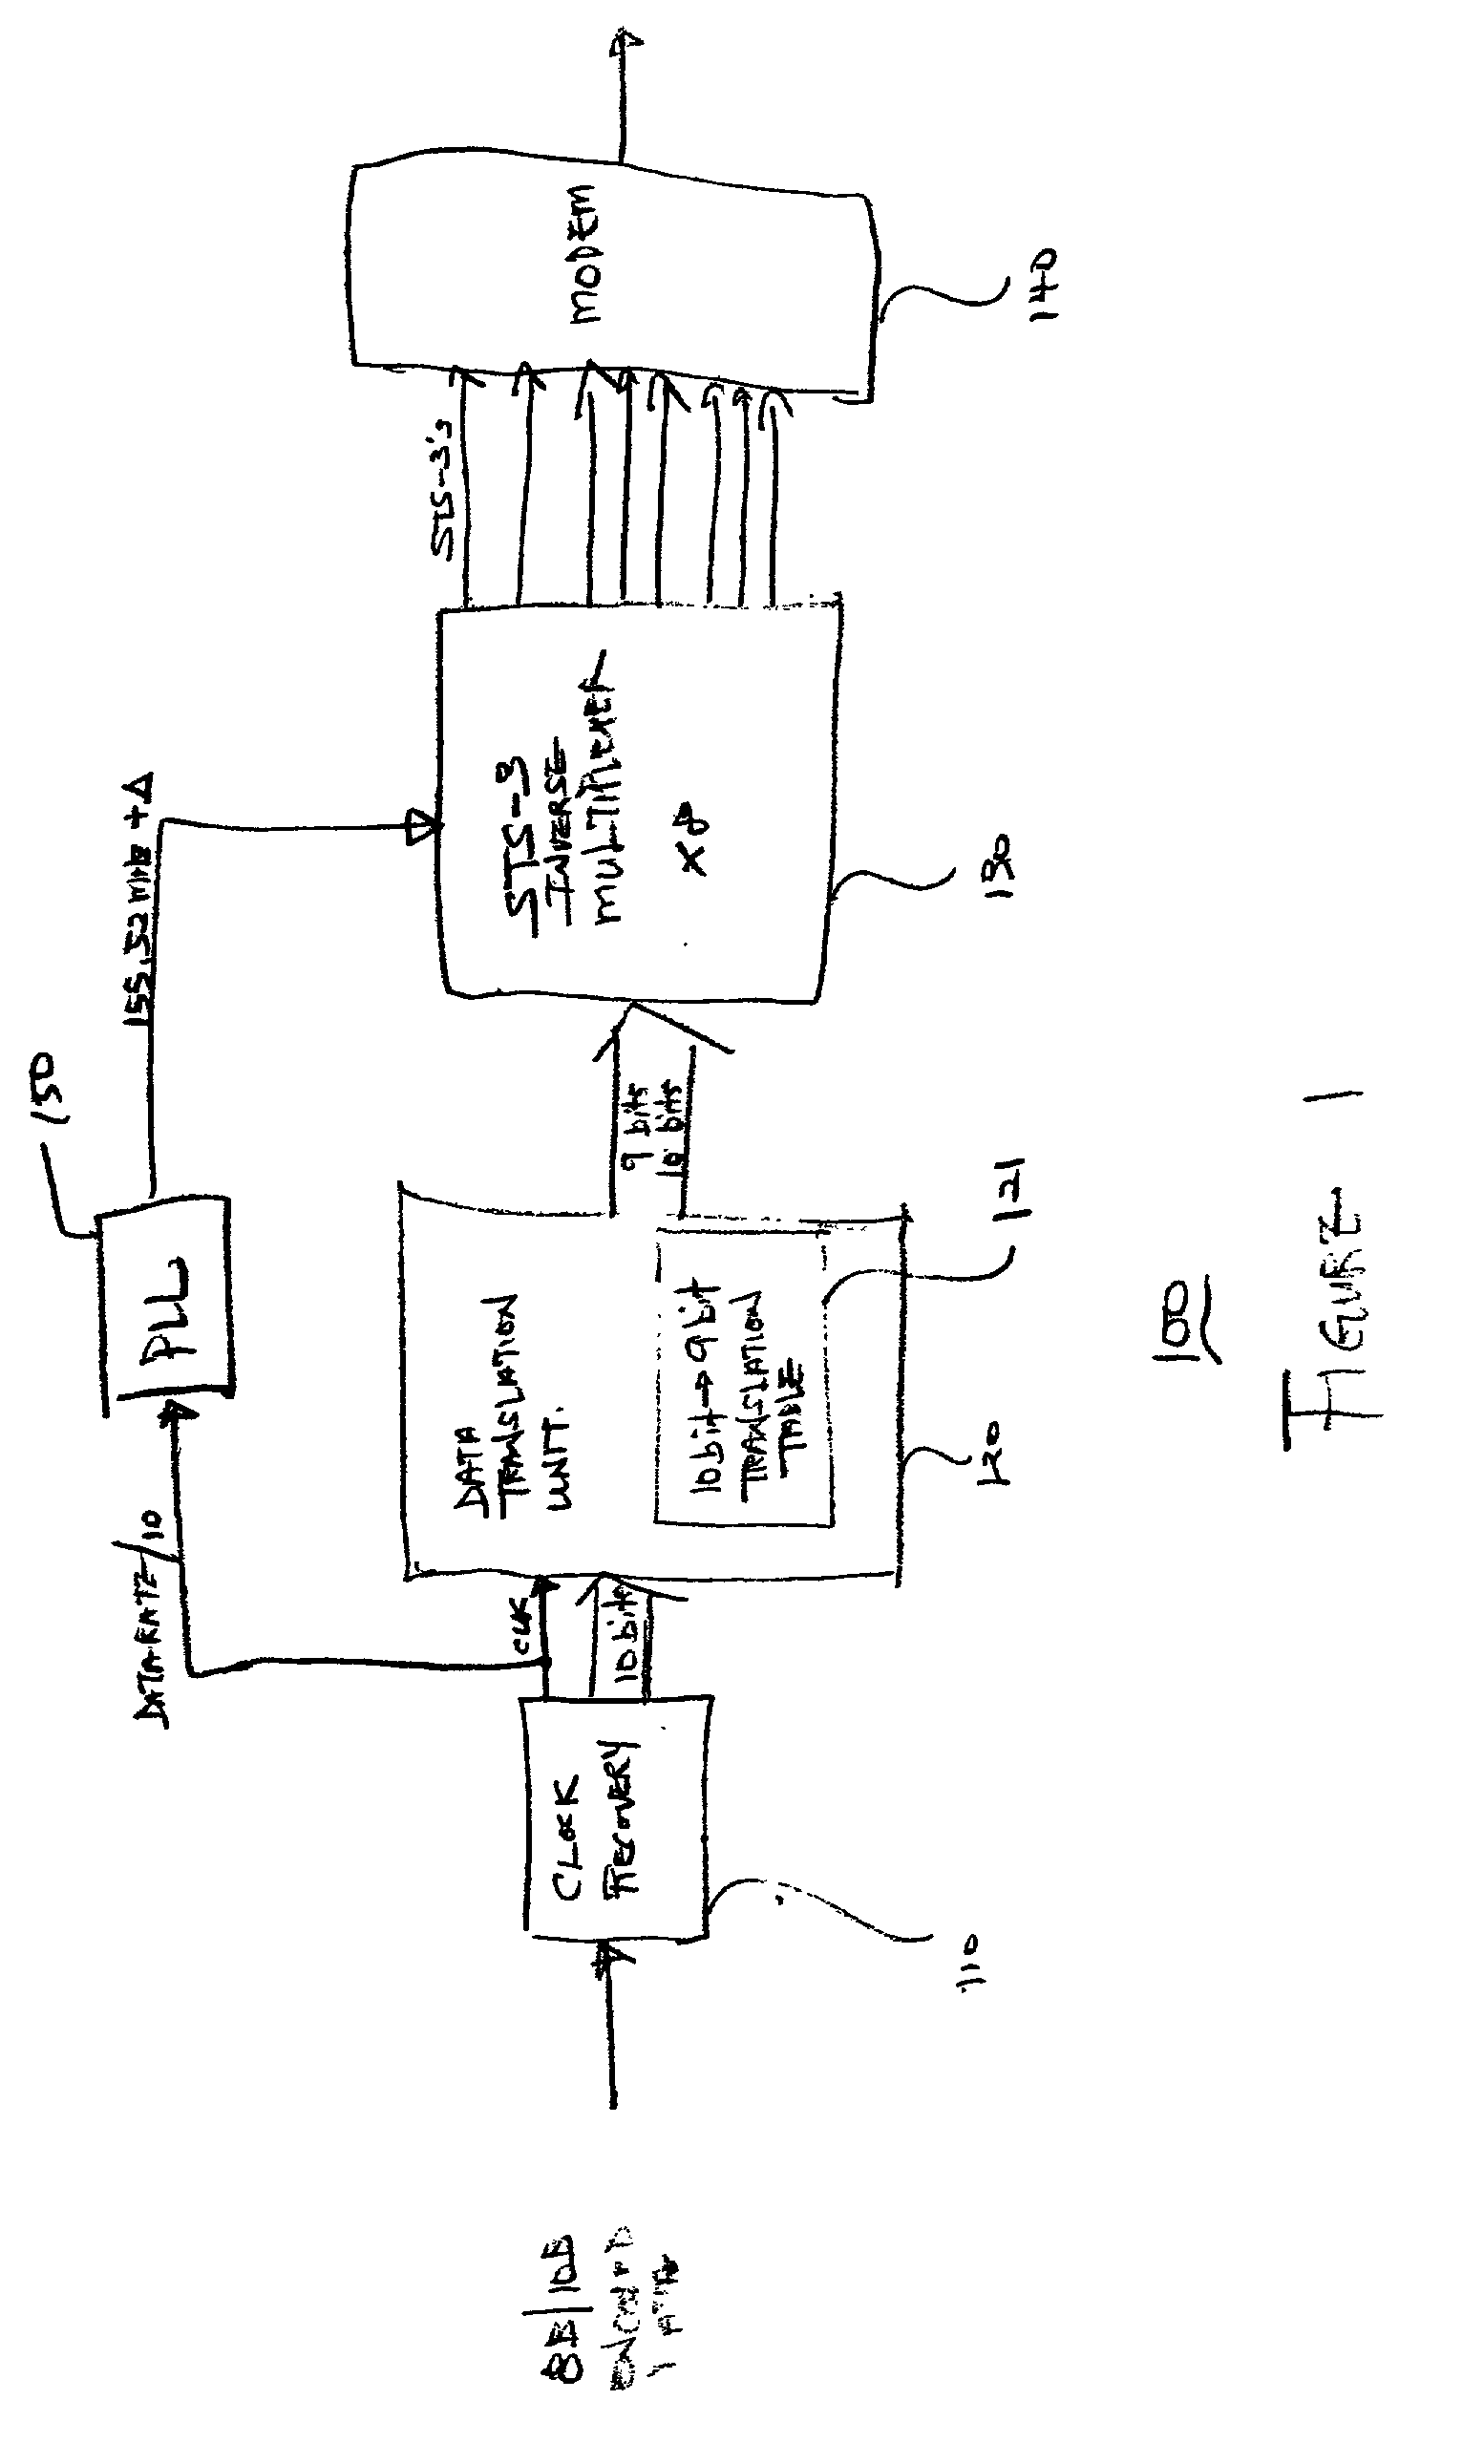 Method and apparatus for providing a gigabit ethernet circuit pack